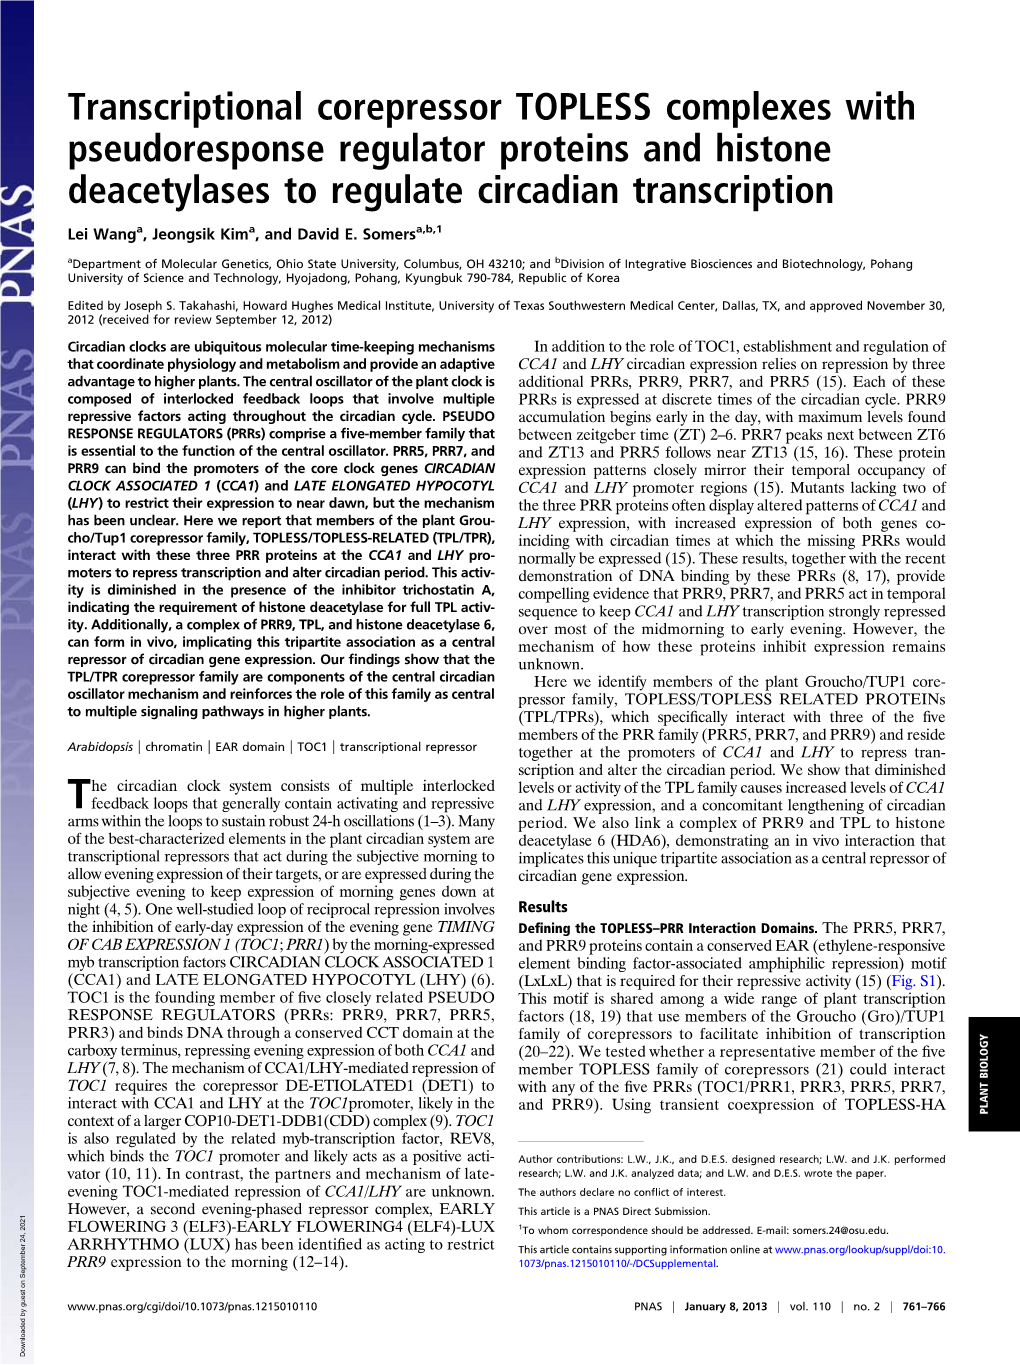 Transcriptional Corepressor TOPLESS Complexes with Pseudoresponse Regulator Proteins and Histone Deacetylases to Regulate Circadian Transcription